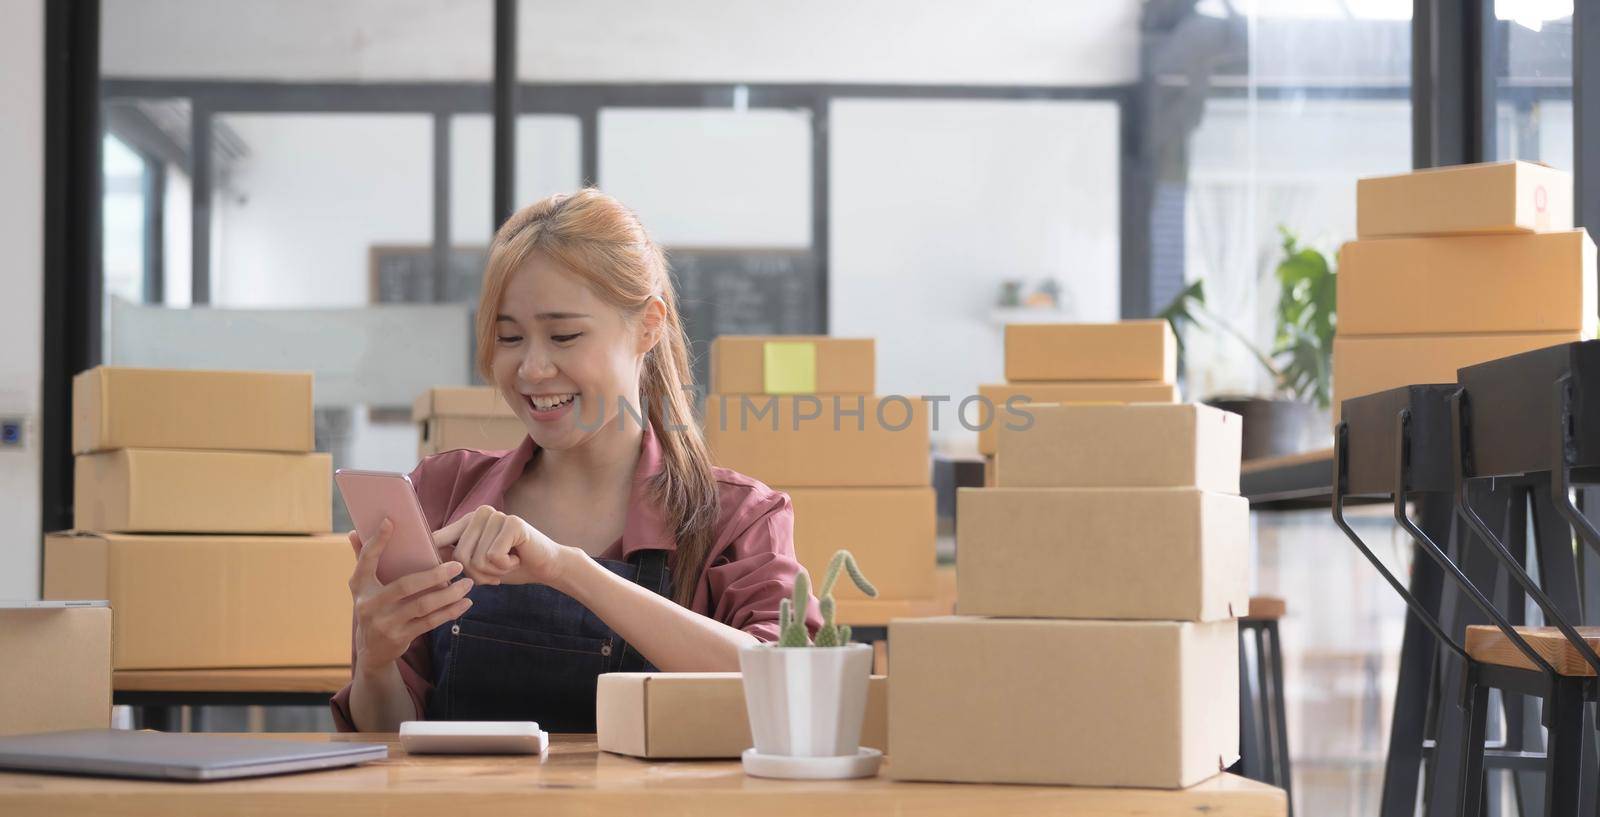 Entrepreneur Woman small business owner taking note of orders from customers with mobile phones. SME entrepreneur or freelance life style concept. by wichayada